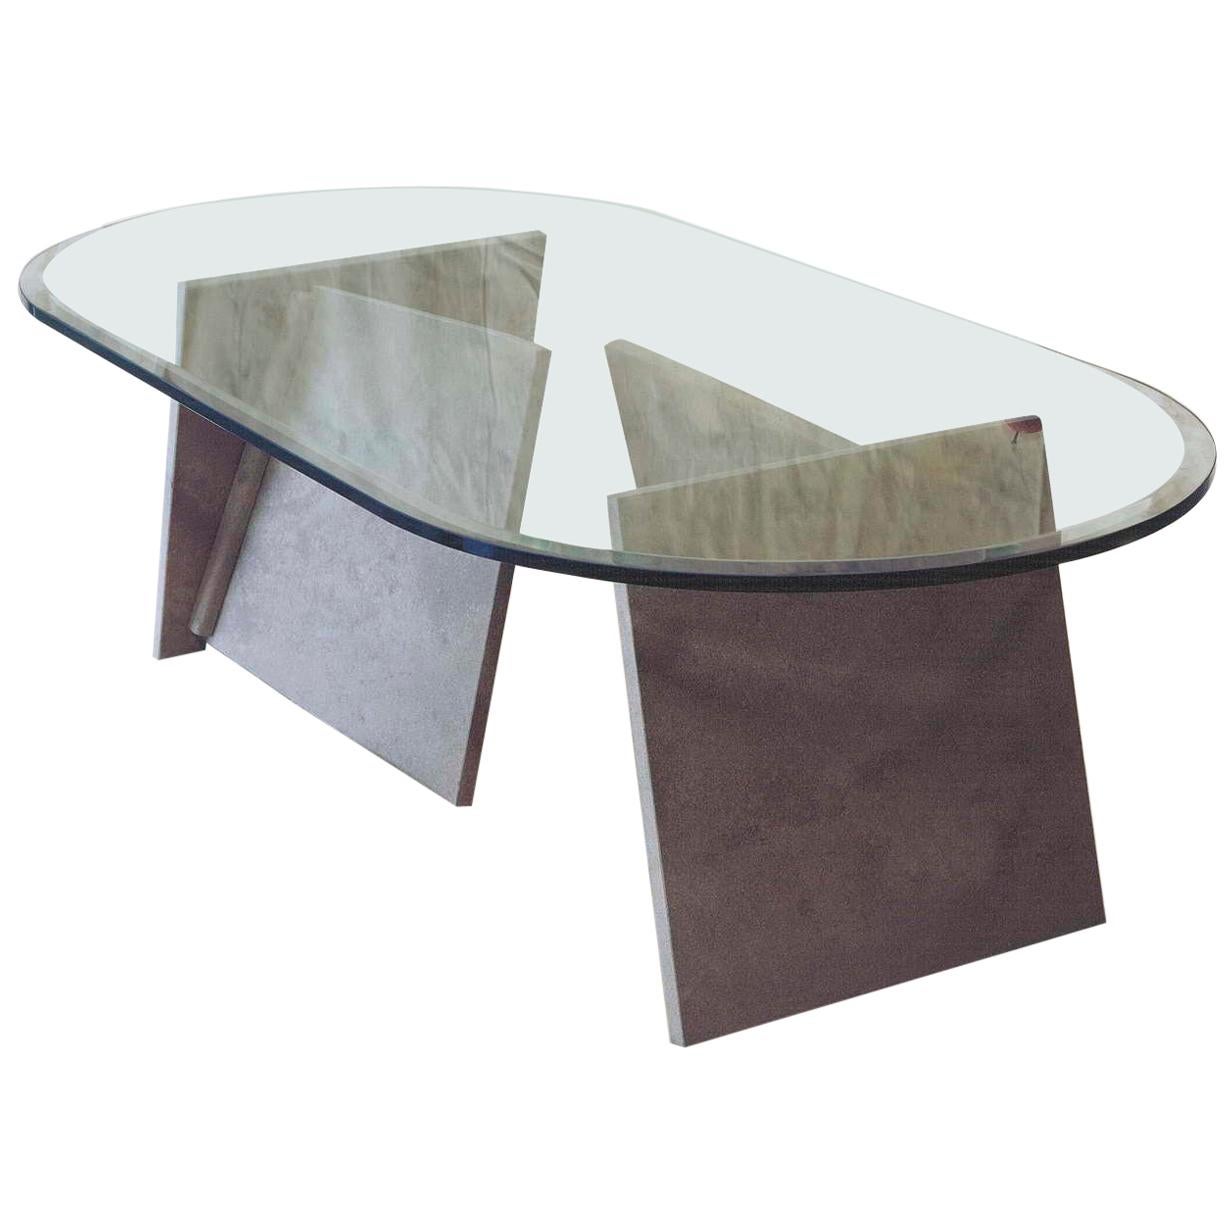 21st Century by Arch. E. Mari "DUE CARTE" Marble Coffee Table with Crystal Top